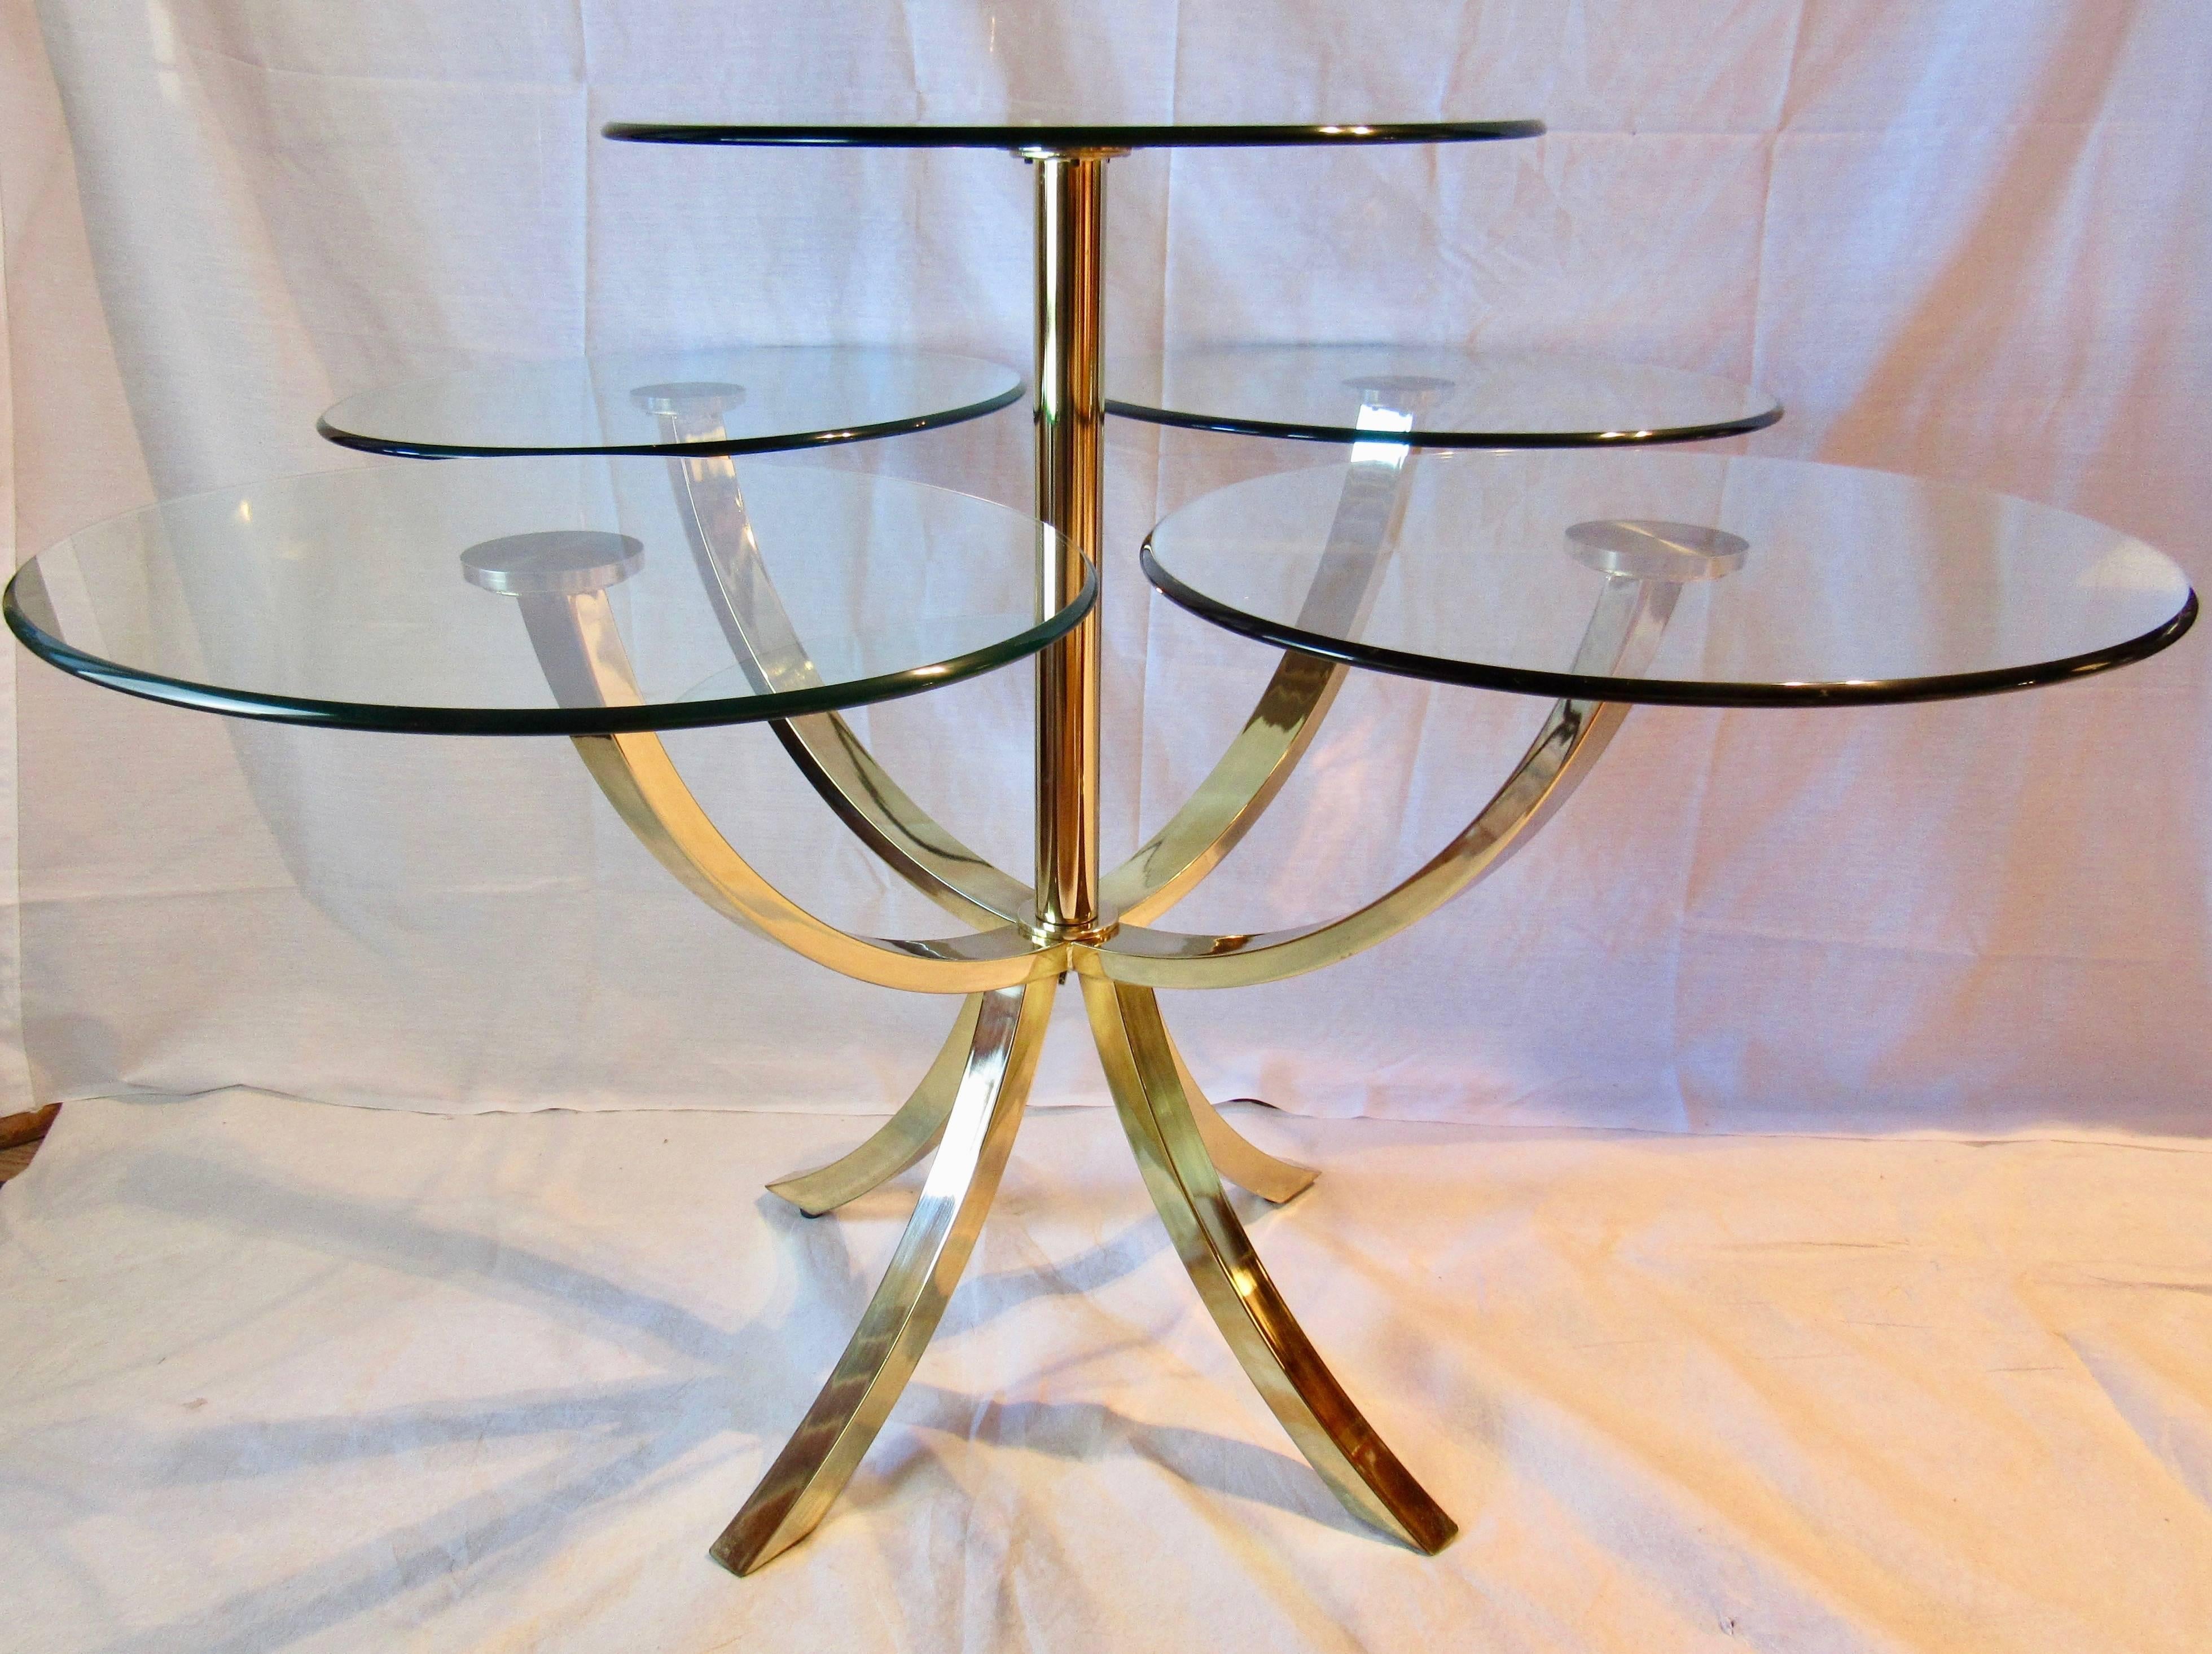 Polished DIA, Design Institute of America Circle of Life Brass Dining Table 1970s